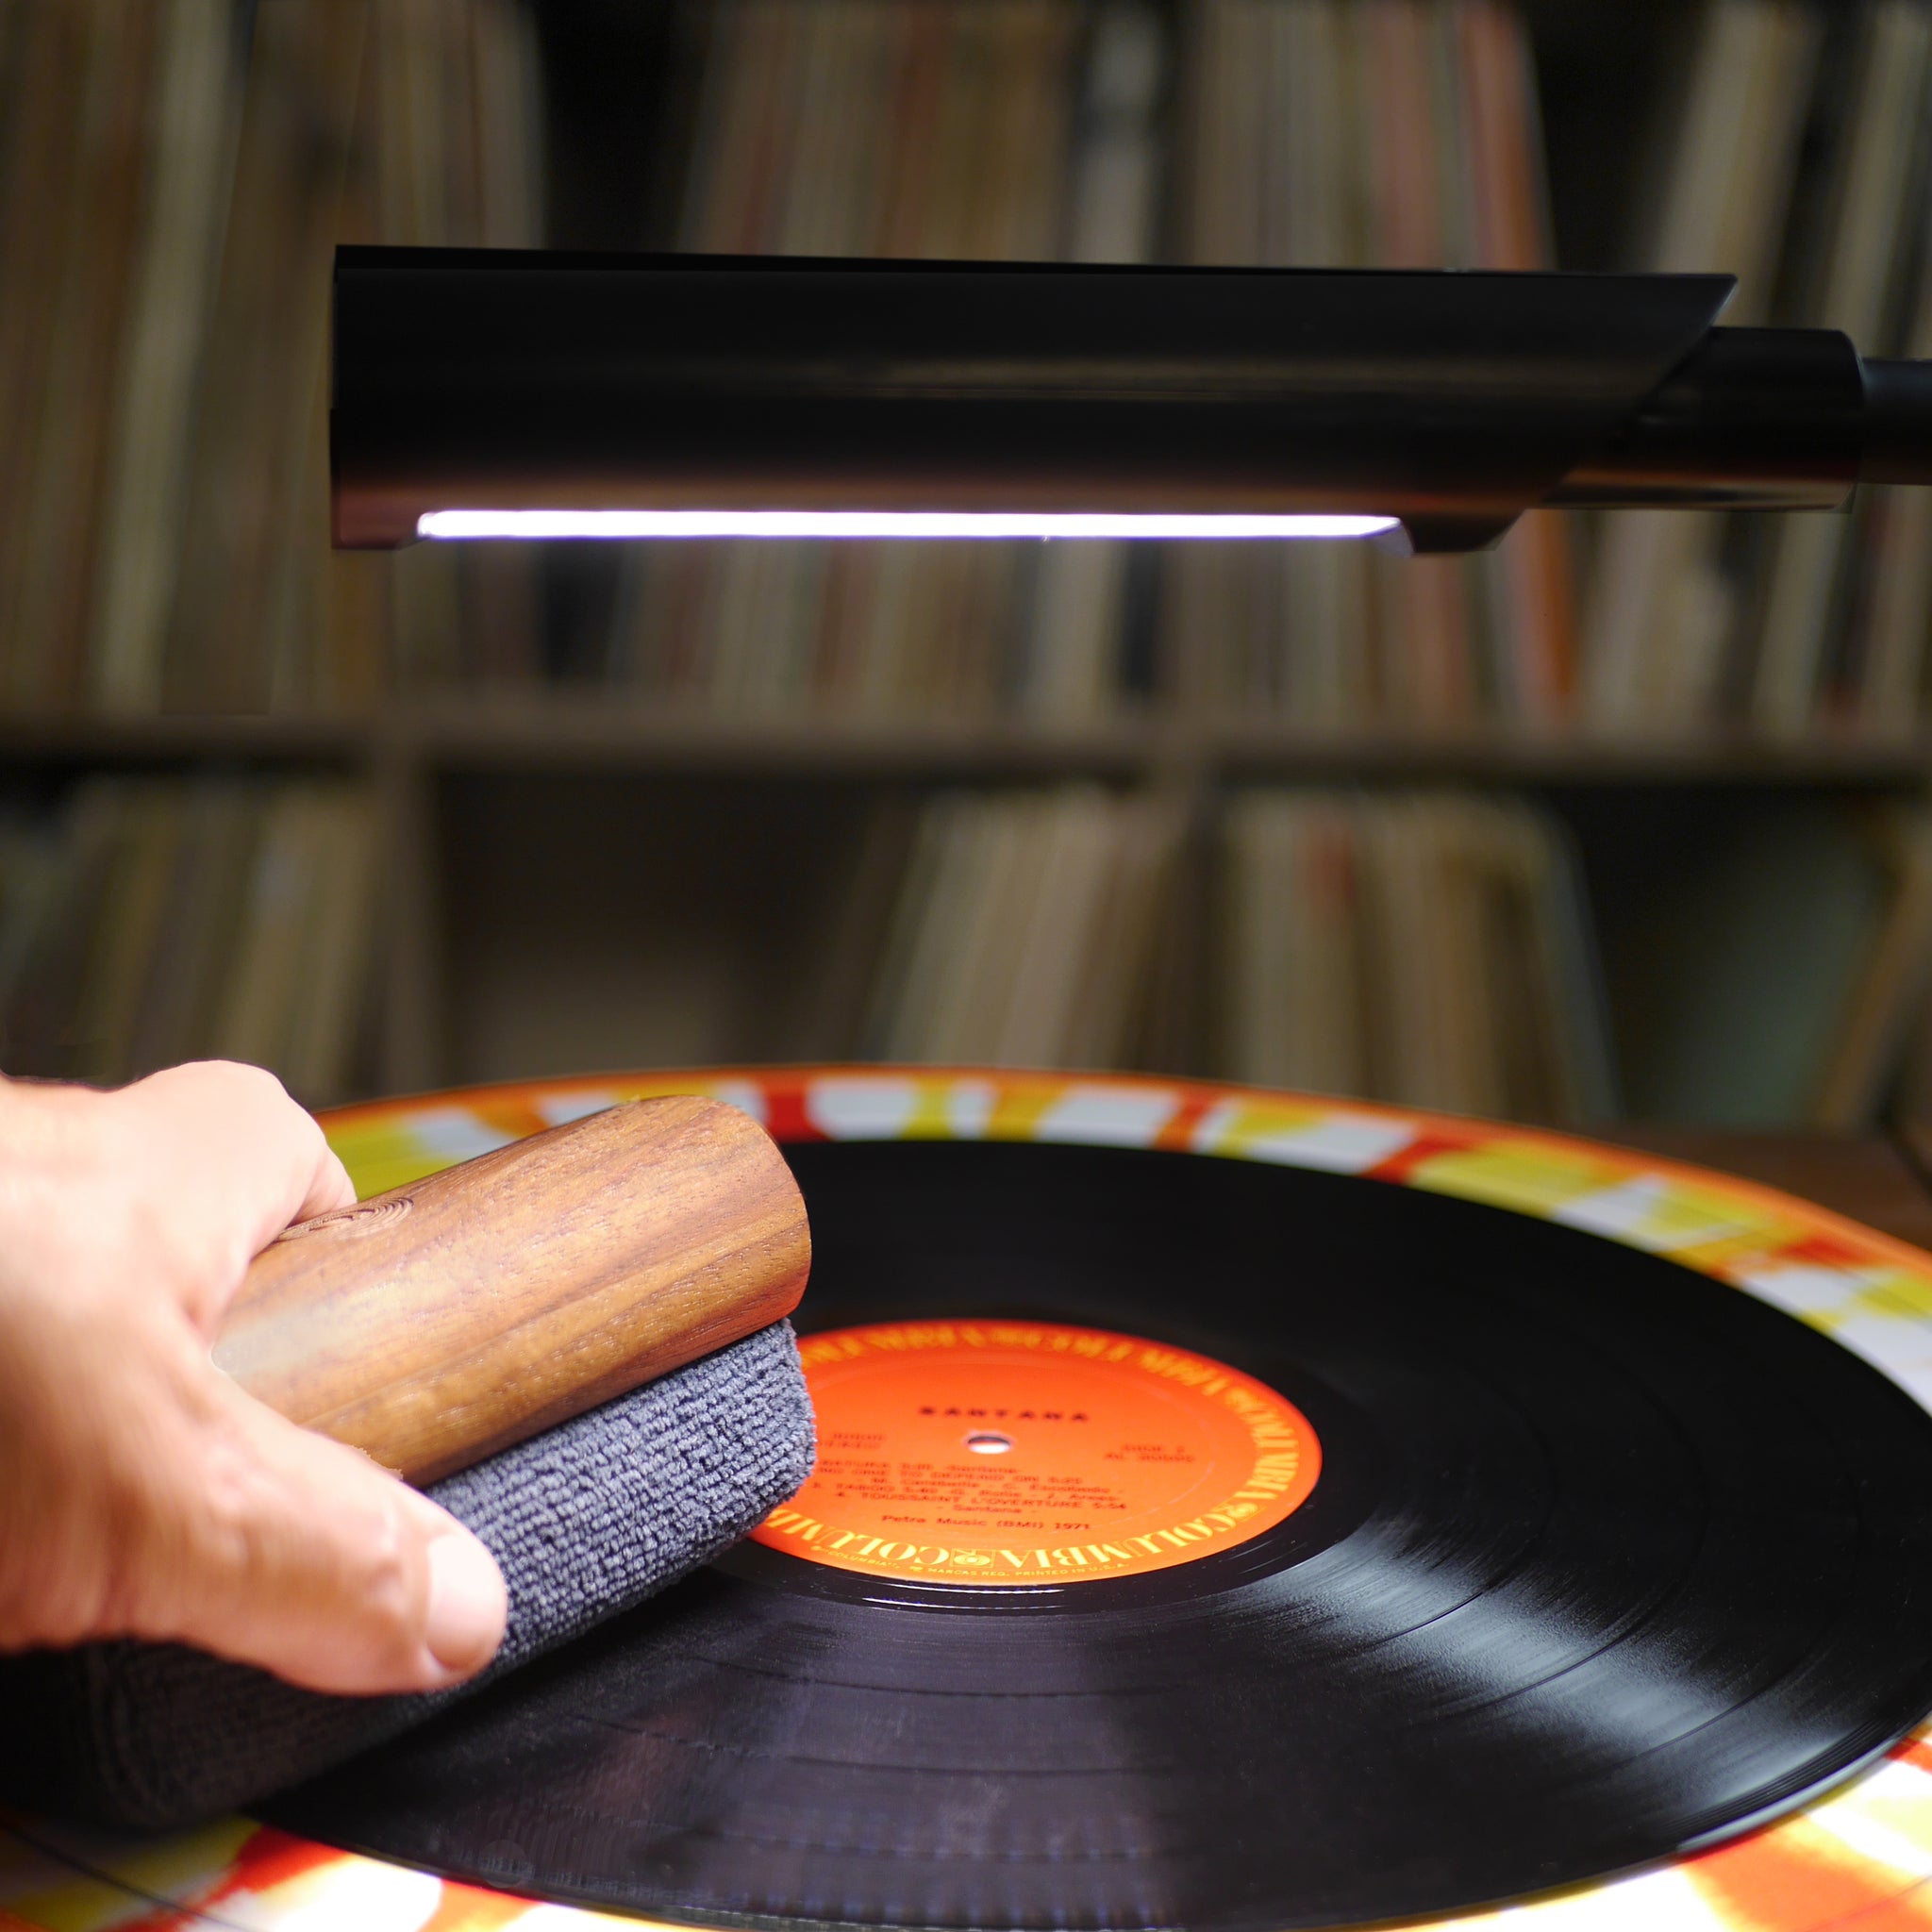 How to Clean Vinyl Records